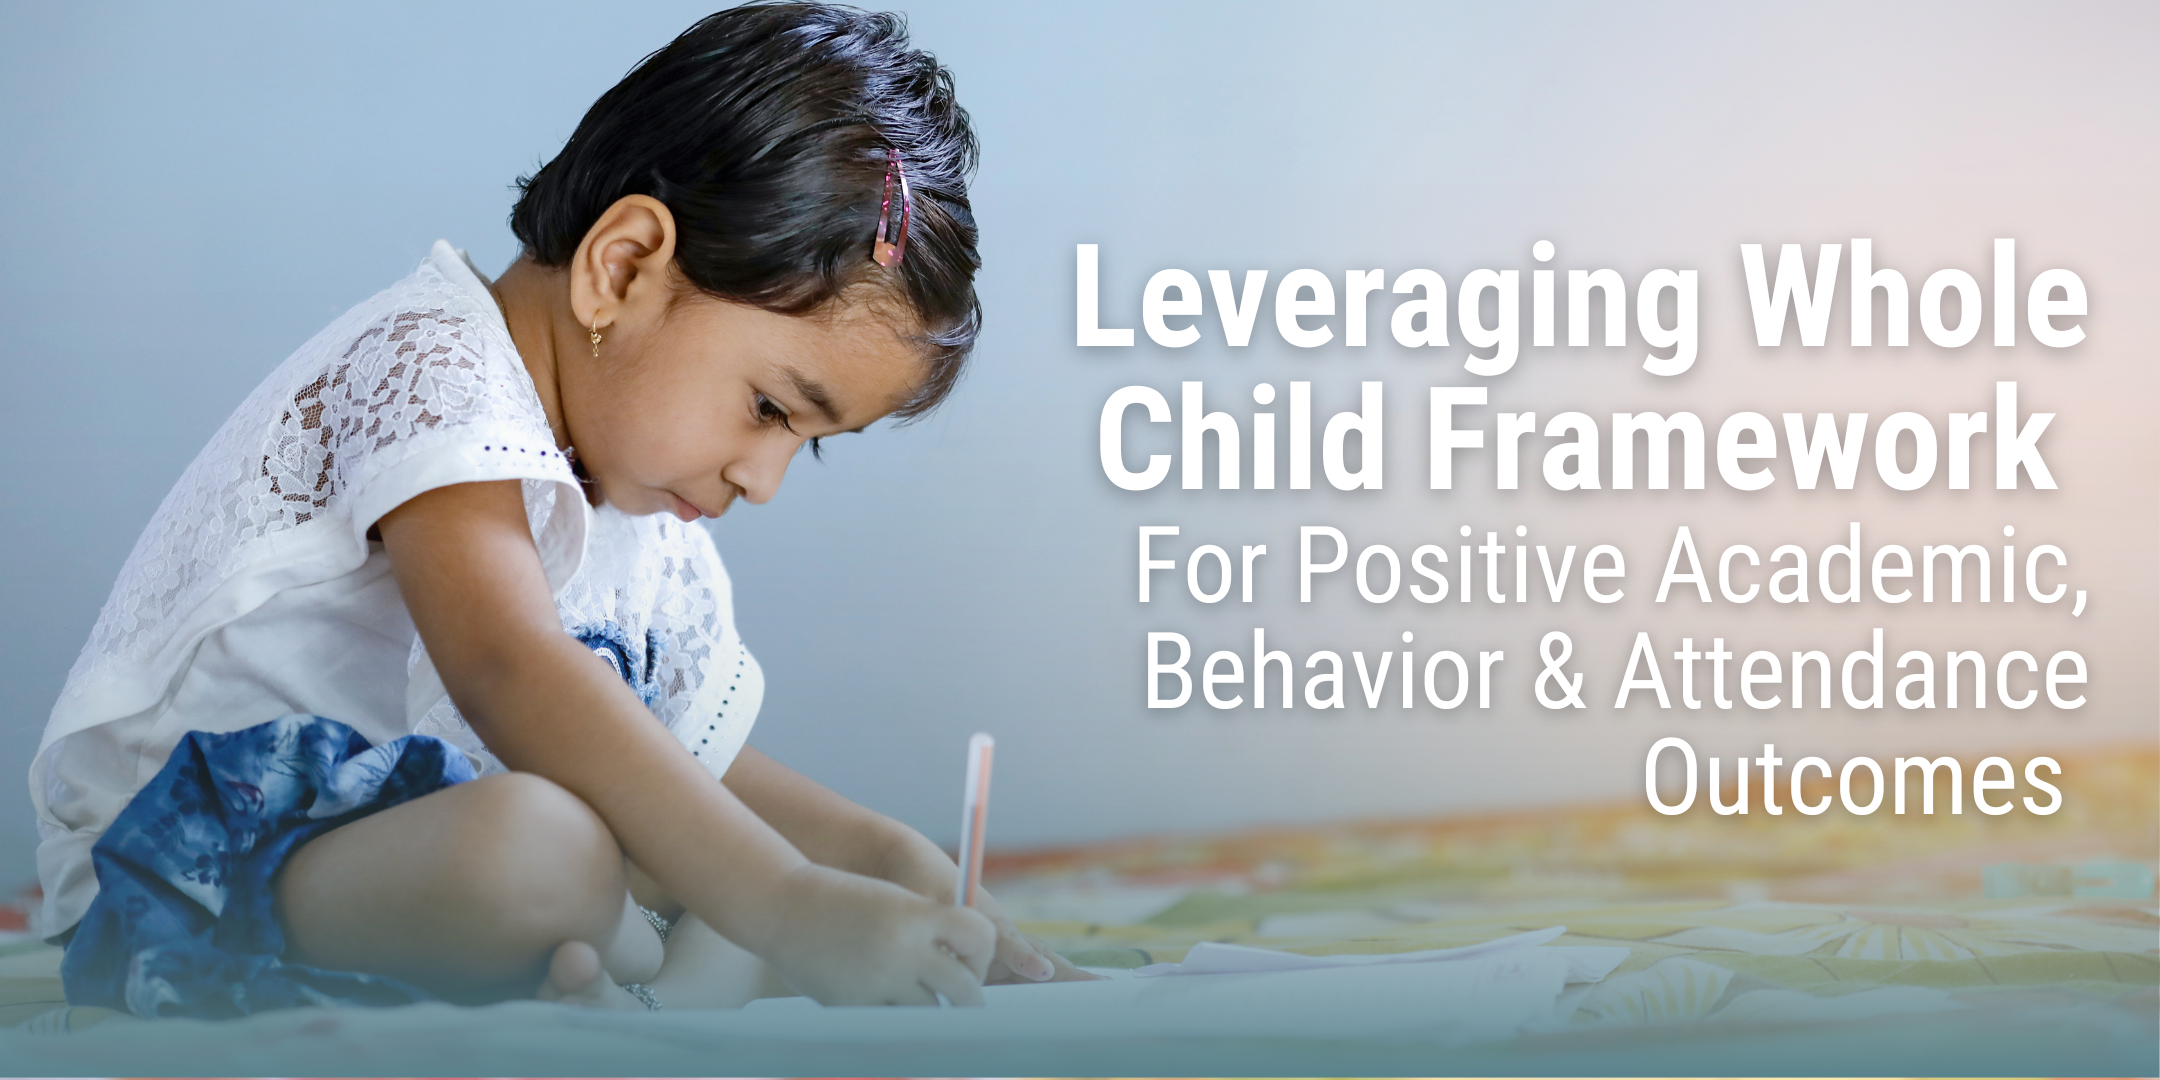 Banner displaying blog title "Leveraging Whole Child Framework for Positive Academic, Behavior & Attendance Outcomes".